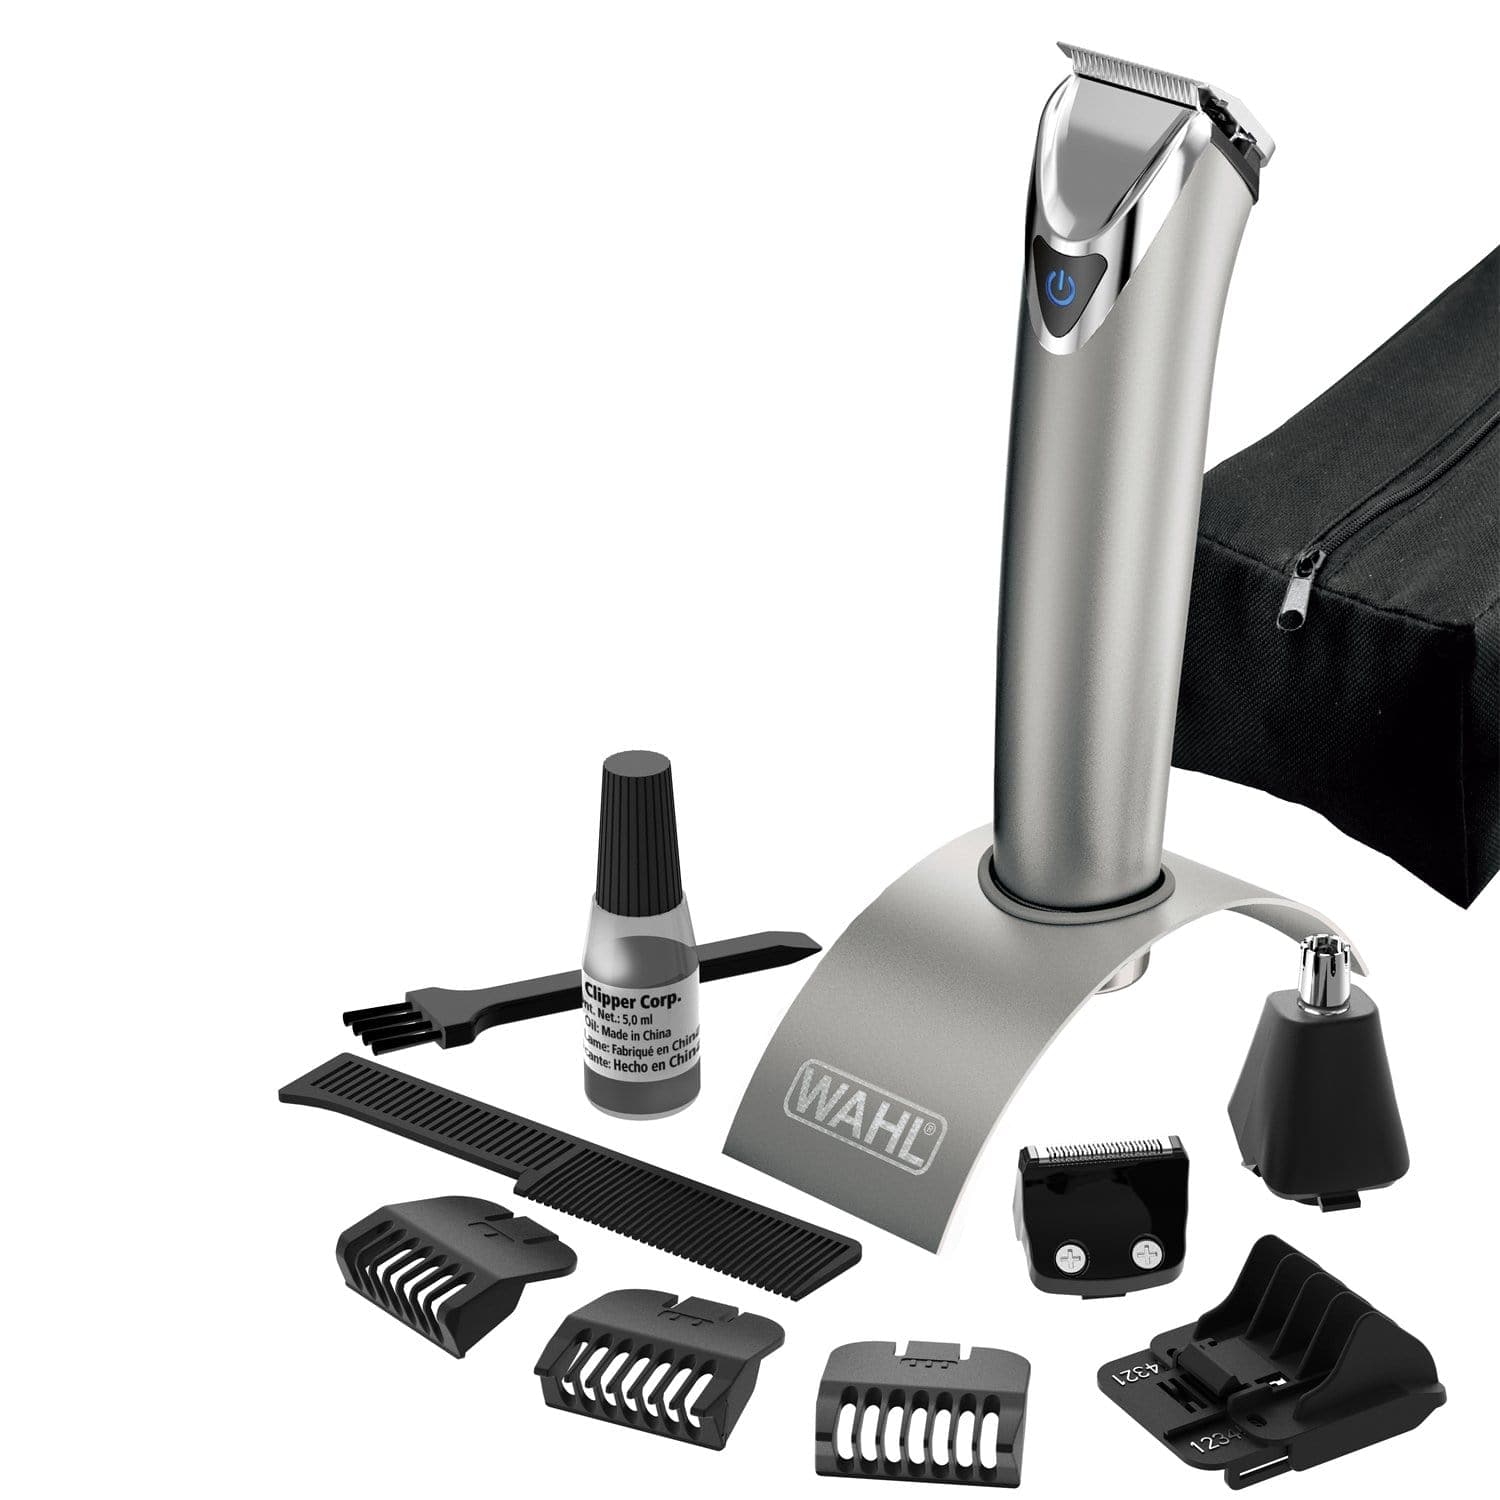 Wahl Lithium Ion Stainless Steel Trimmer - 9818-727